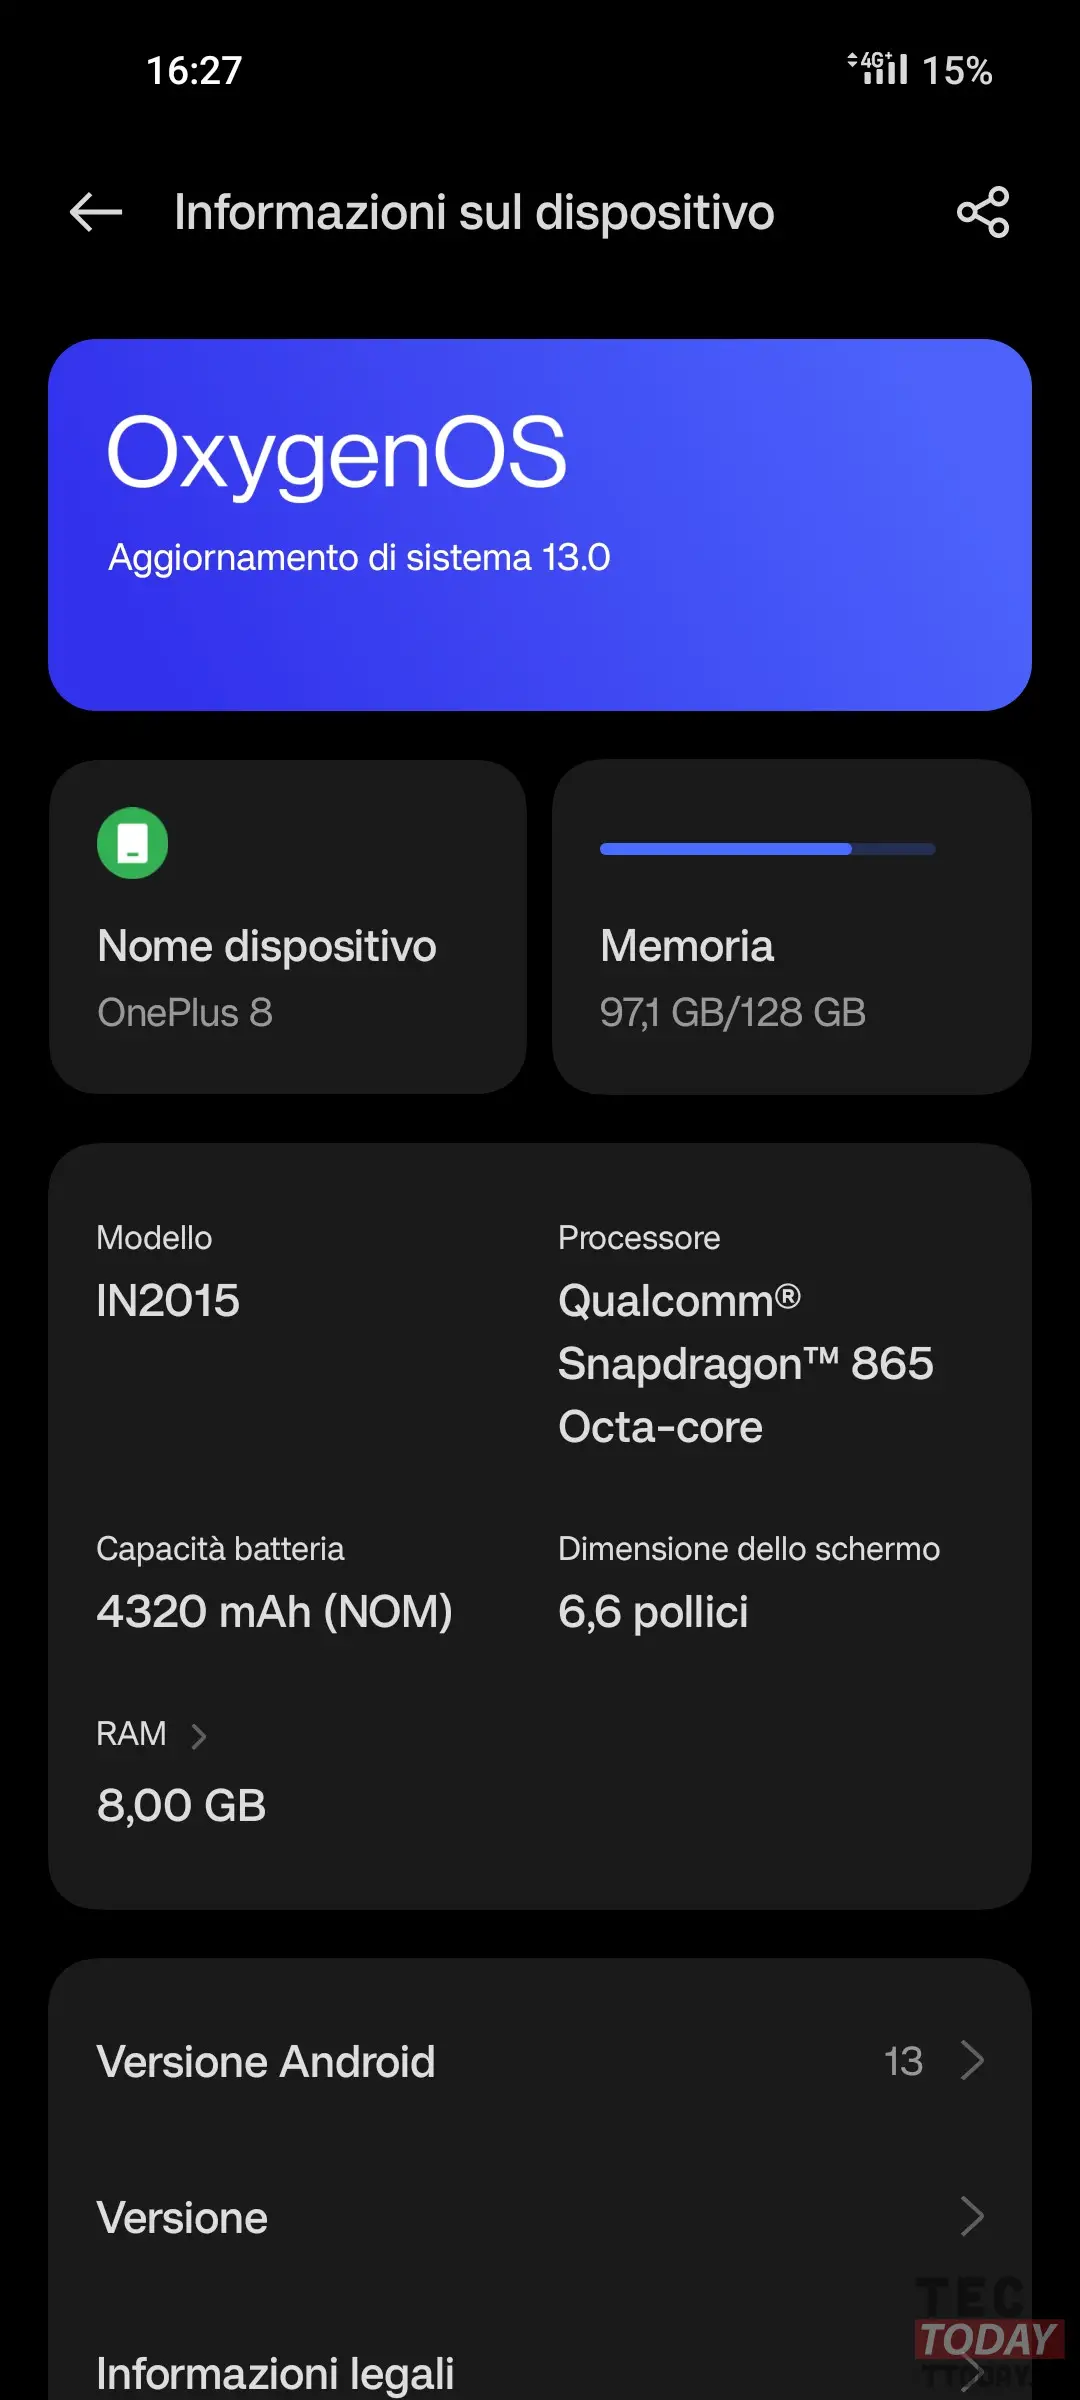 oneplus 8 serie android 13 oxygenos 13